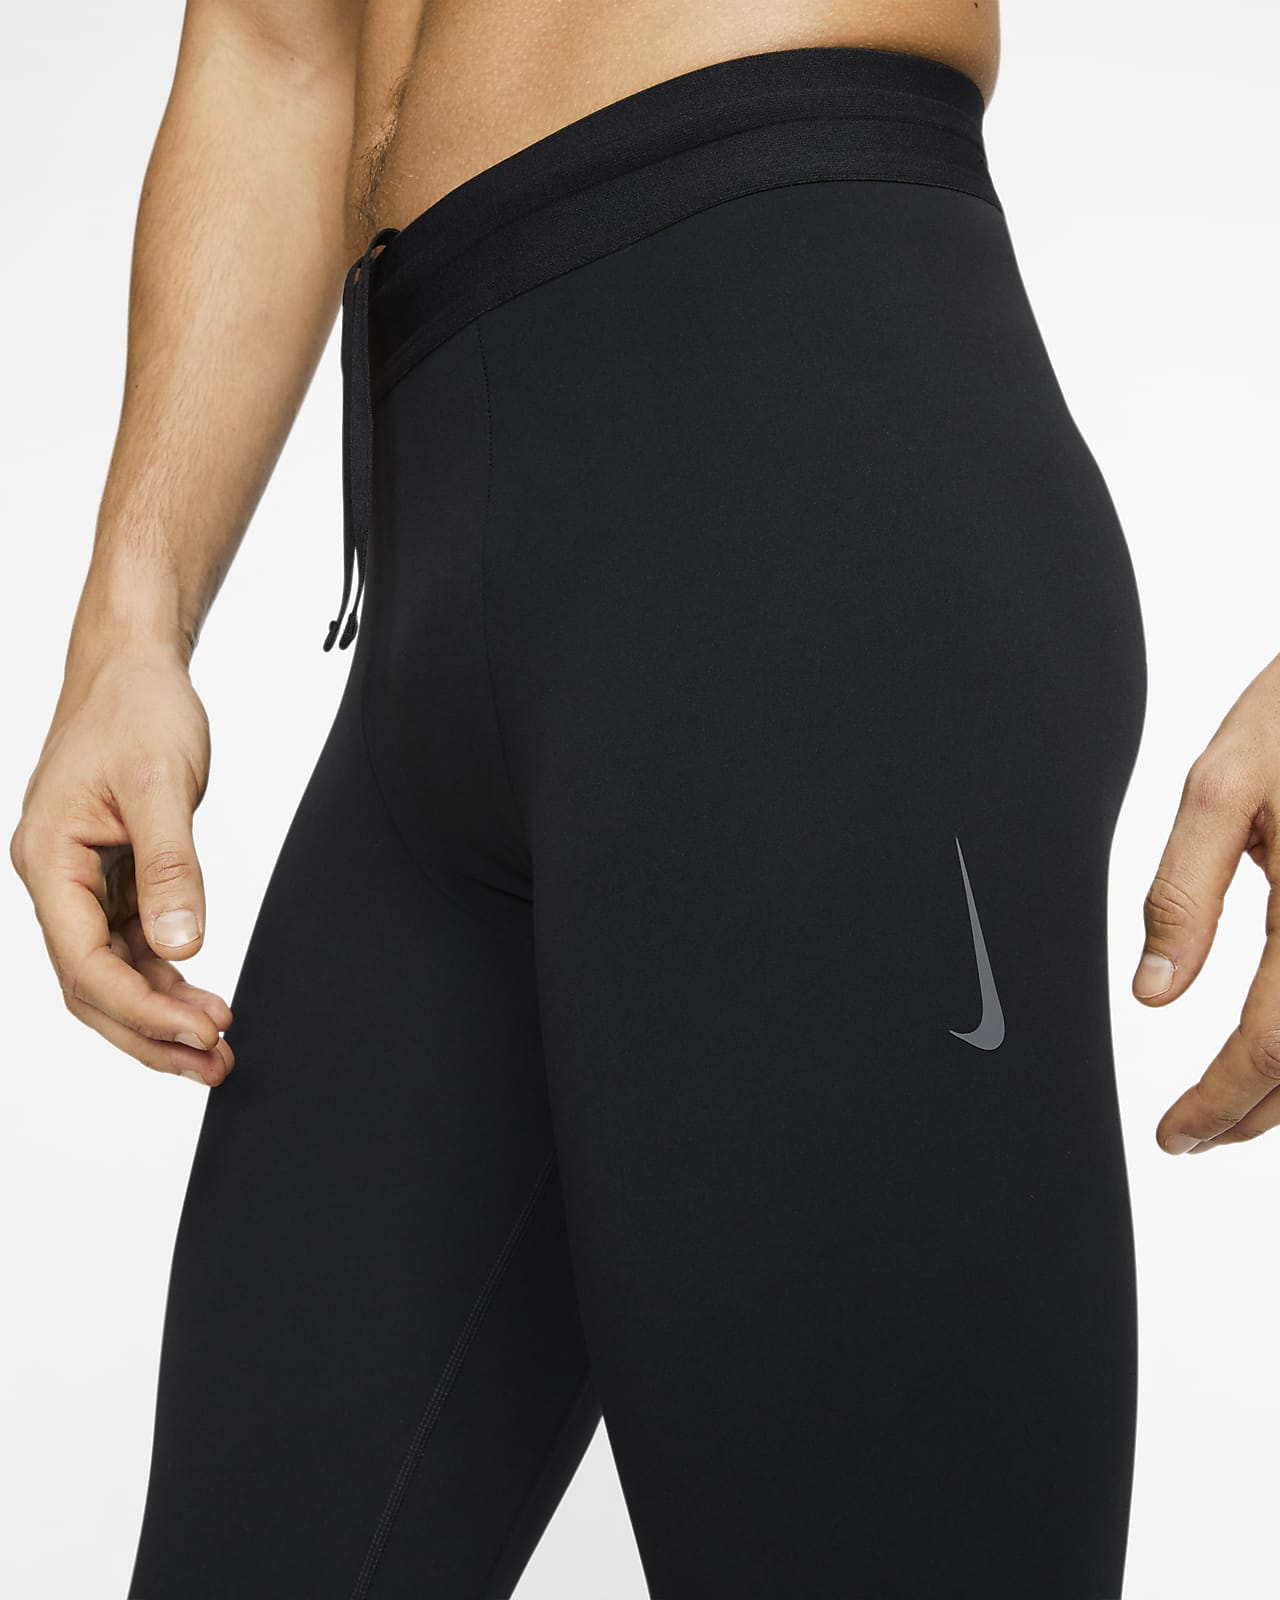 nike fit tights